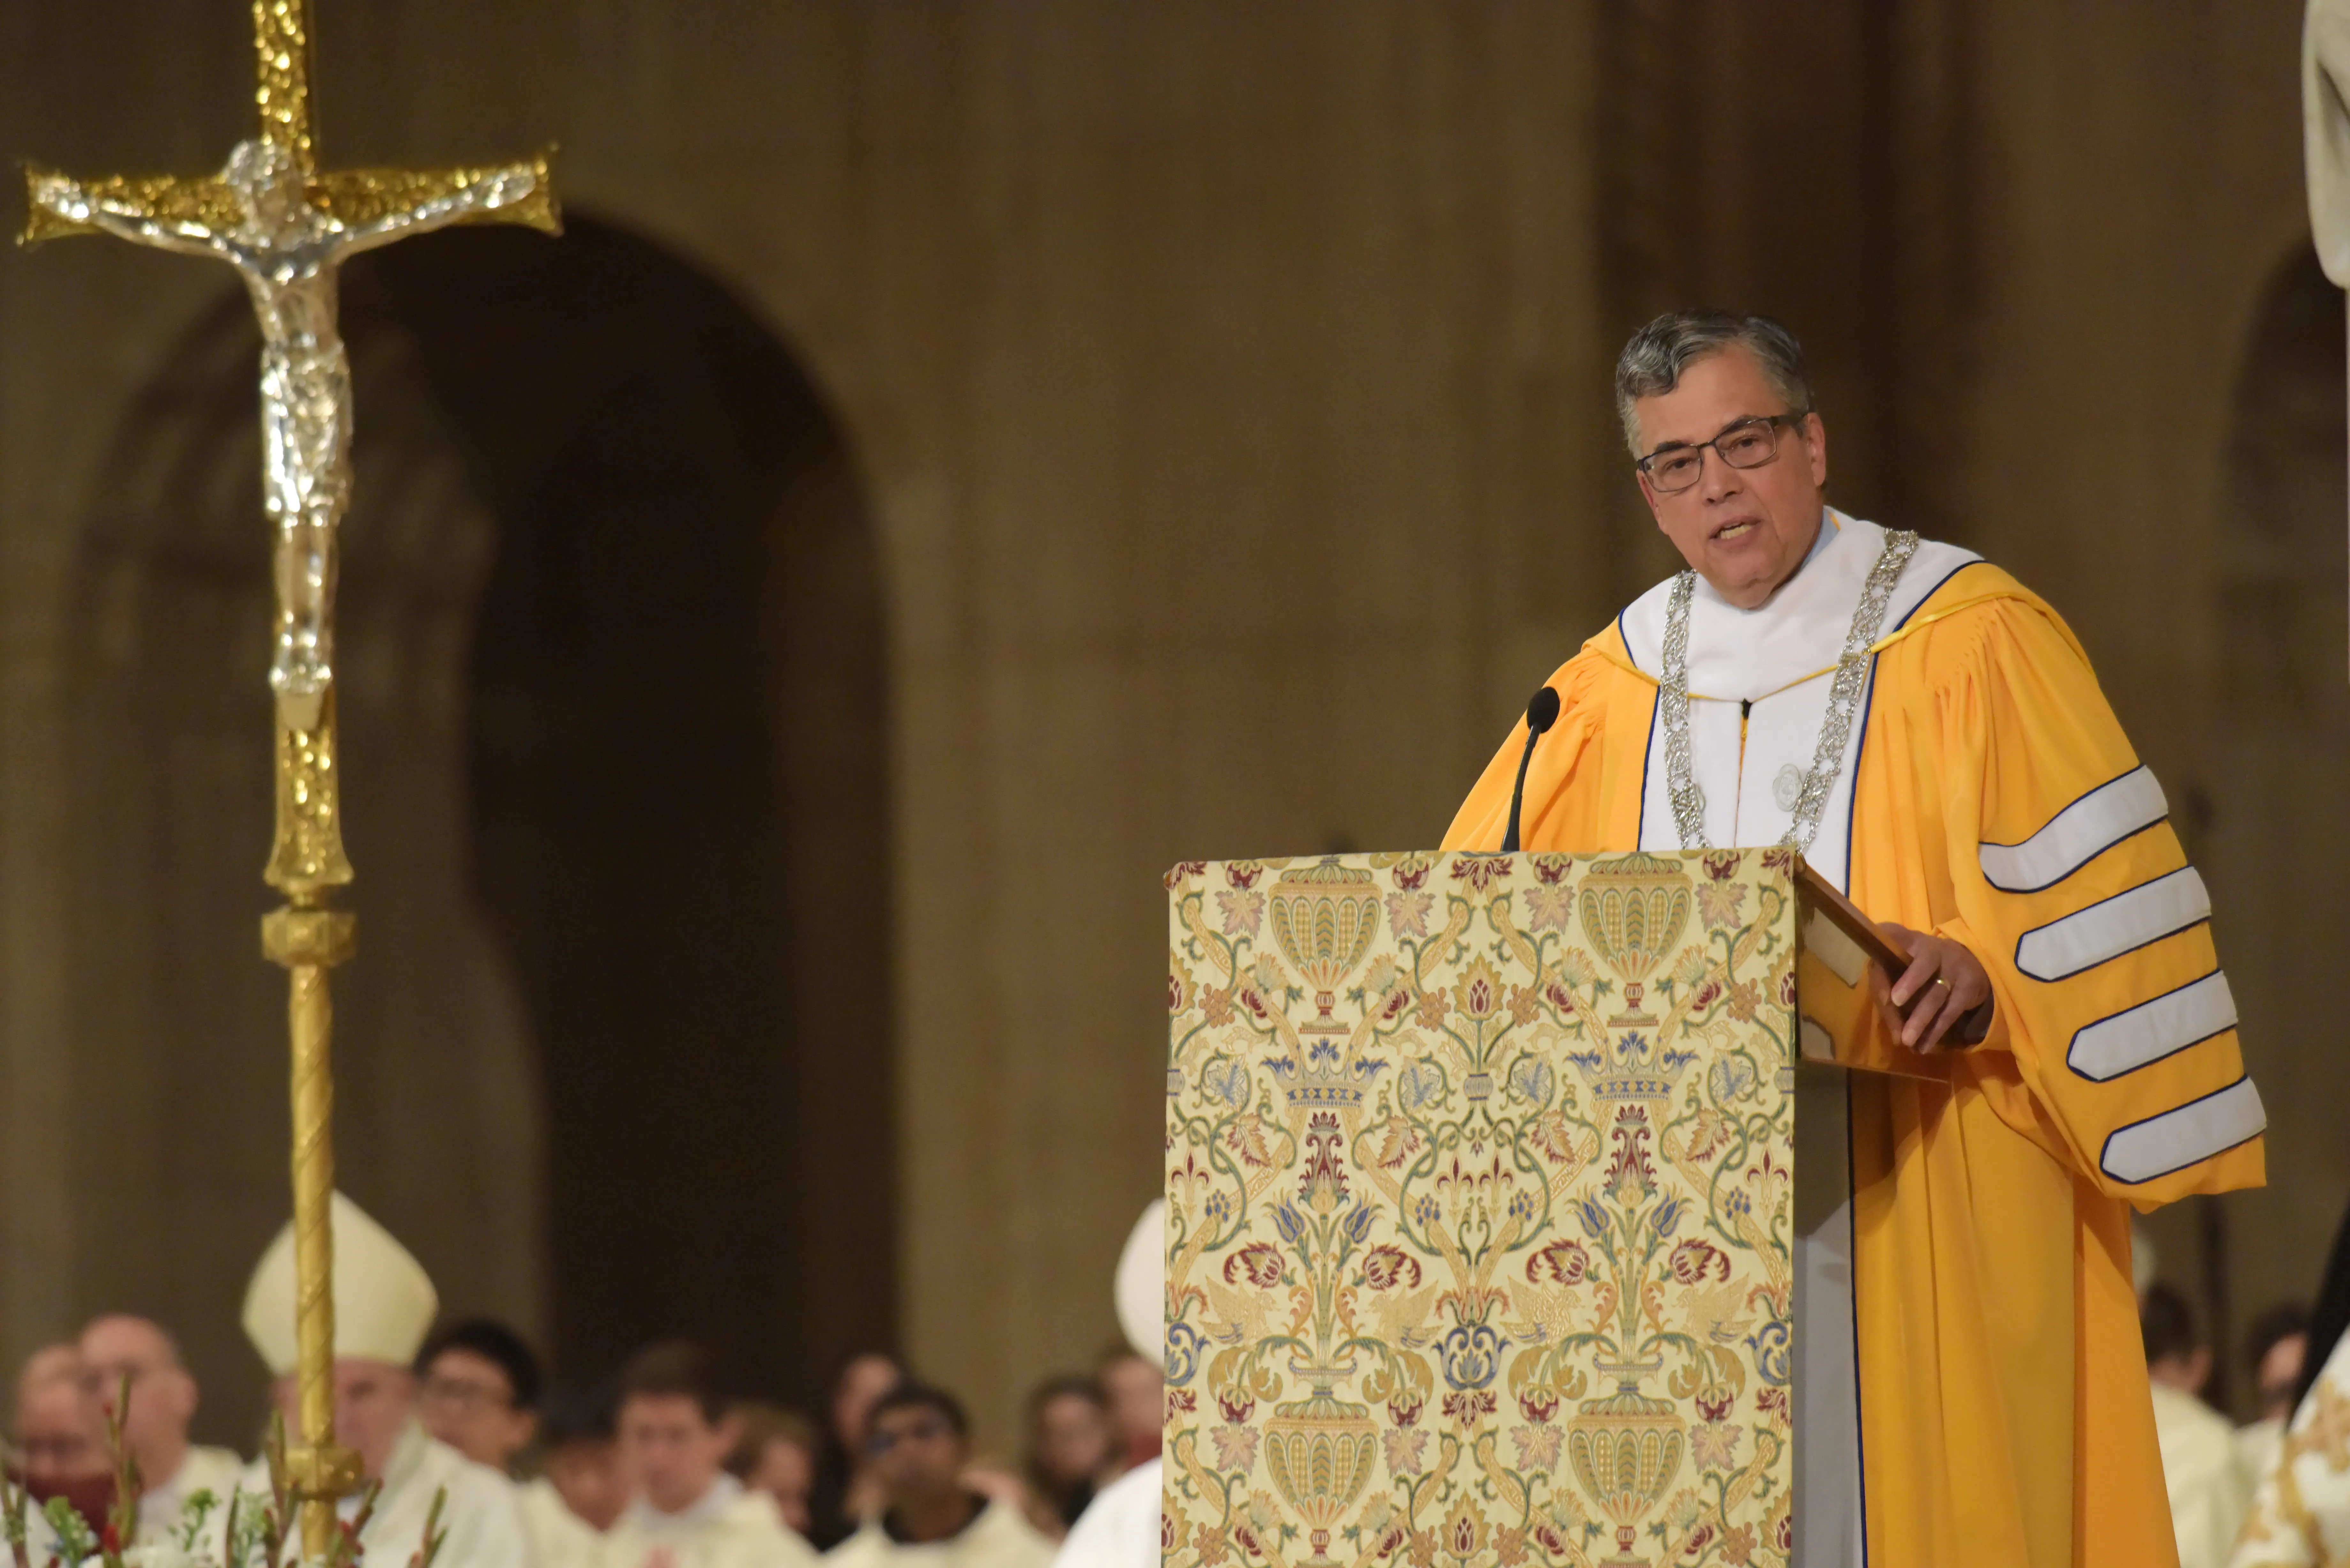 Peter Kilpatrick is formally installed as the 16th president of the Catholic University of America at the Basilica of the National Shrine of the Immaculate Conception in Washington, D.C., on Nov. 11, 2022.?w=200&h=150